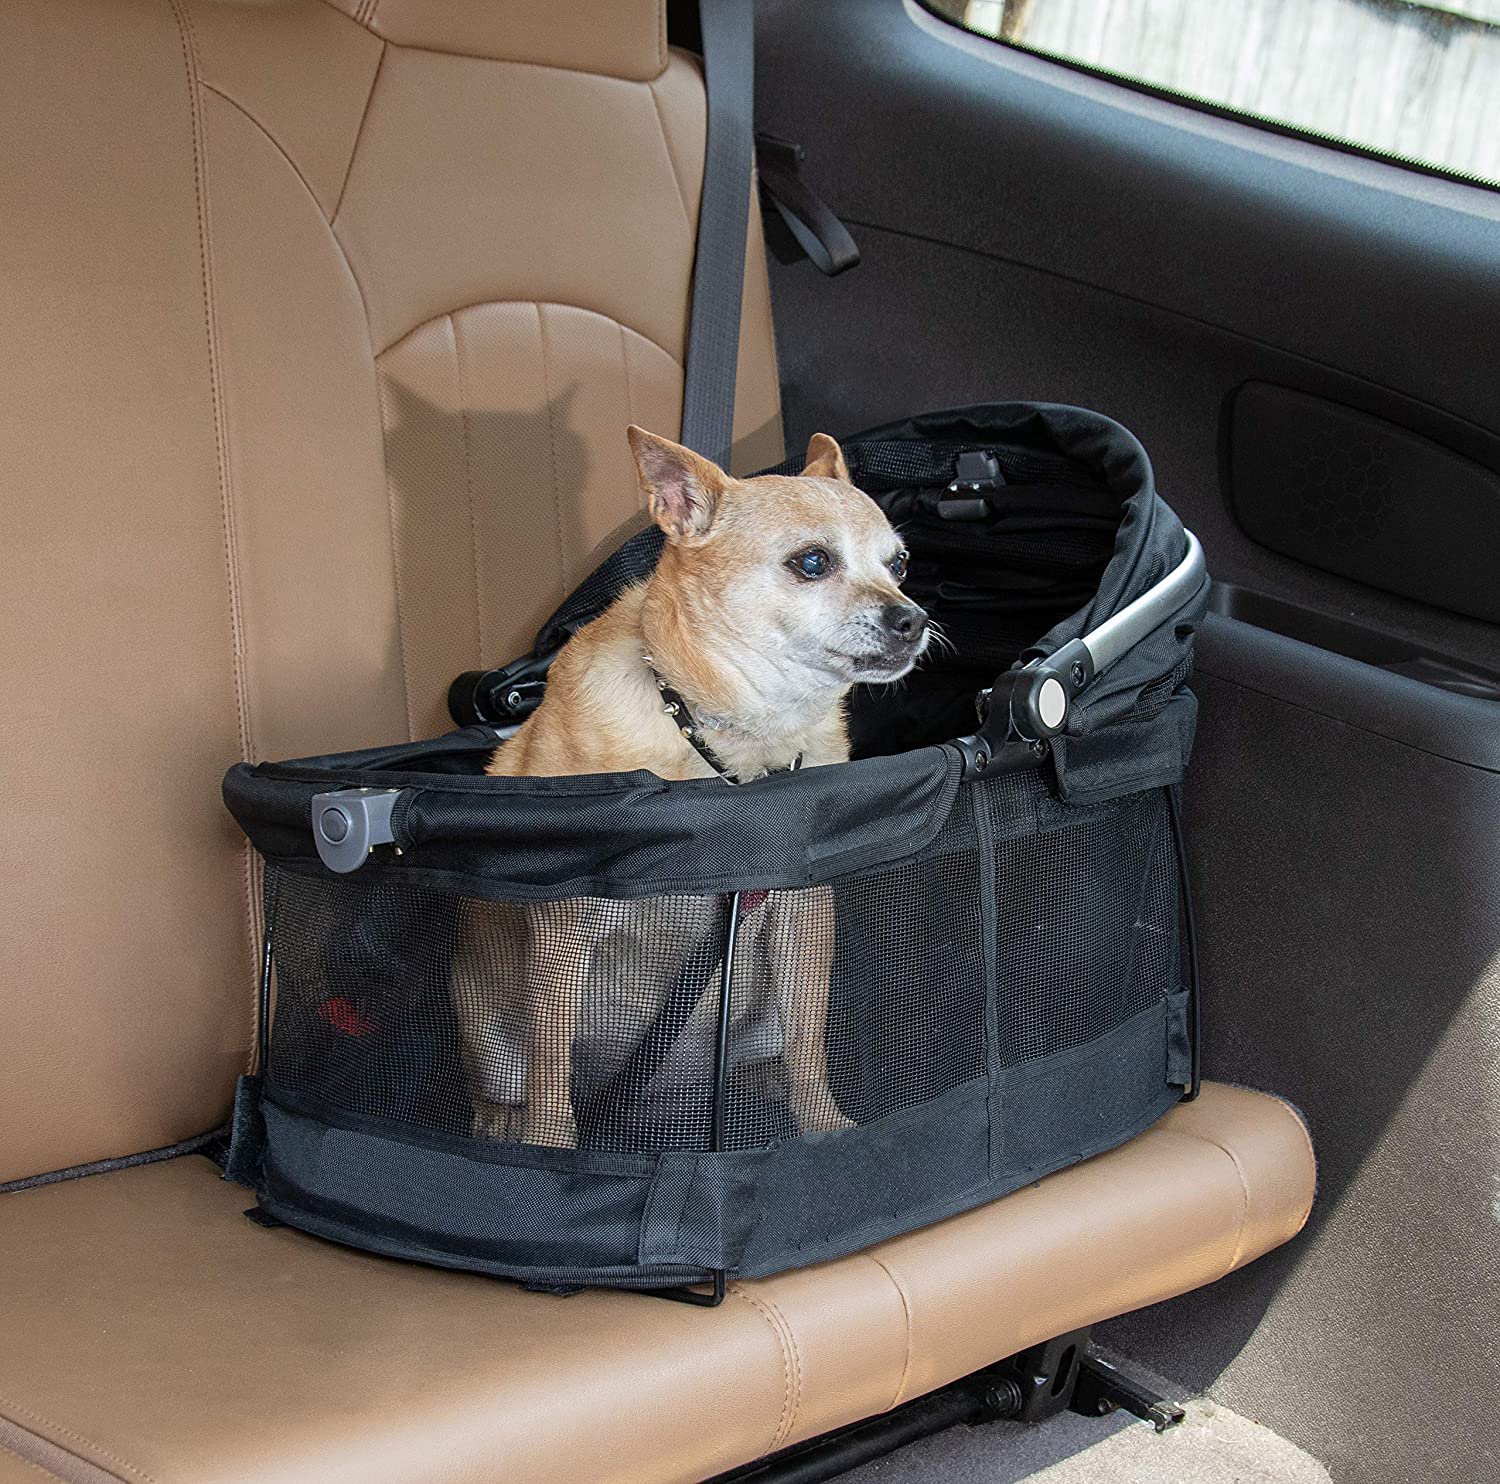 Carrier Car Seat for Cats and Dogs